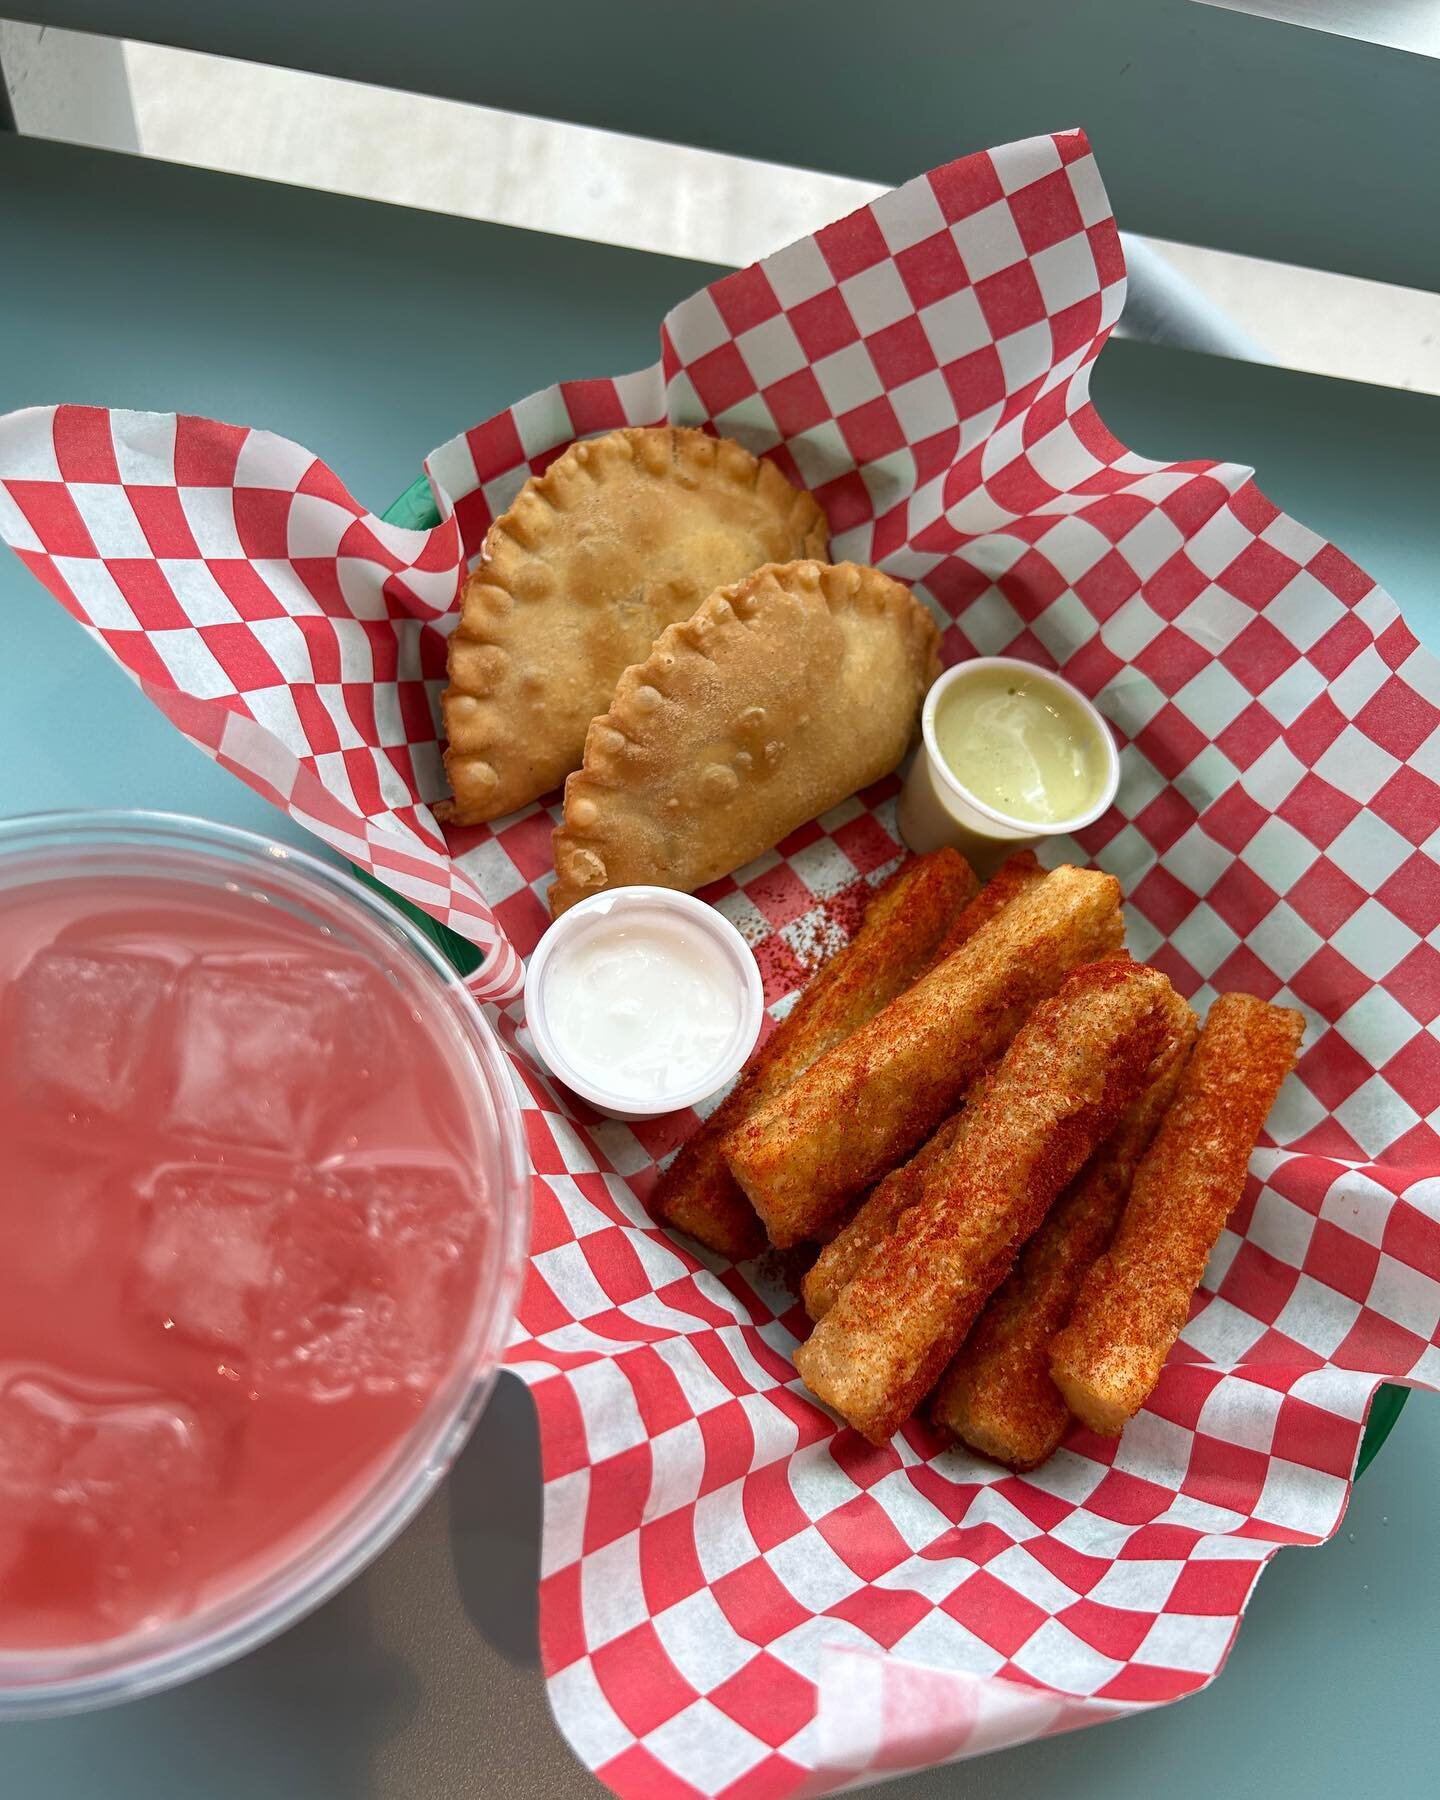 Today&rsquo;s Special 
2 ground beef and cheese empanadas, yucca fries and our watermelon aqua fresca 10$

Open until 5:30pm.

#daily #special #empanadas #nearsouthside #fortworth